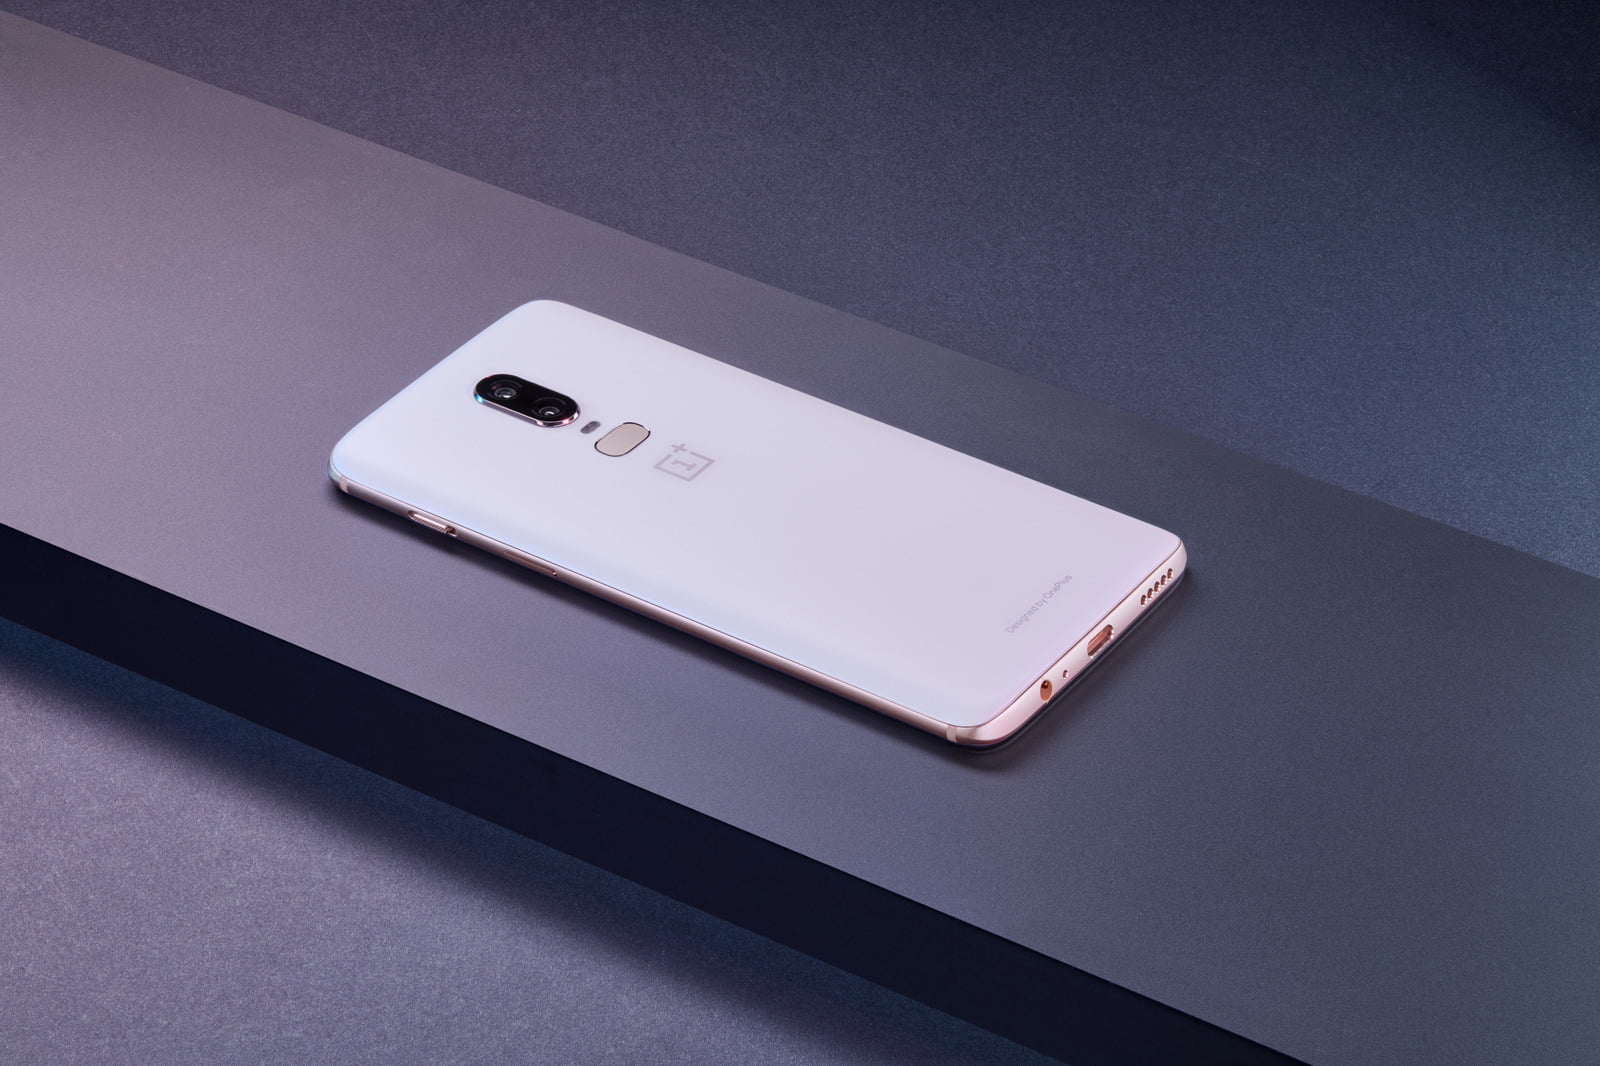 https://i-cdn.phonearena.com/images/articles/322711-image/The-OnePlus-6-in-photos.jpg